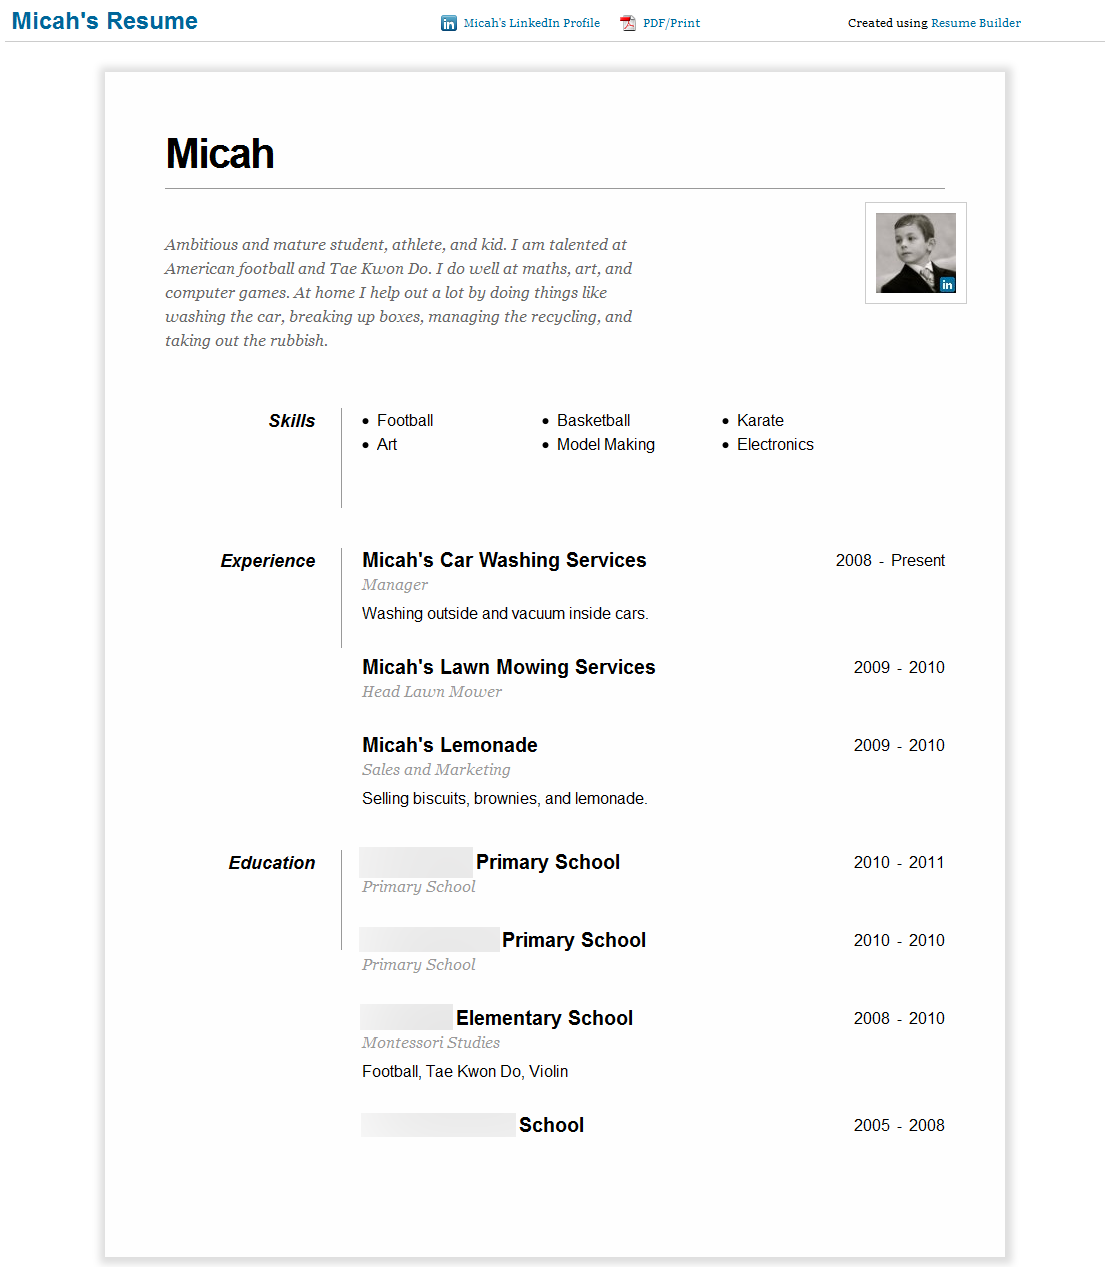 Micah's Resume. Click to see the full size.